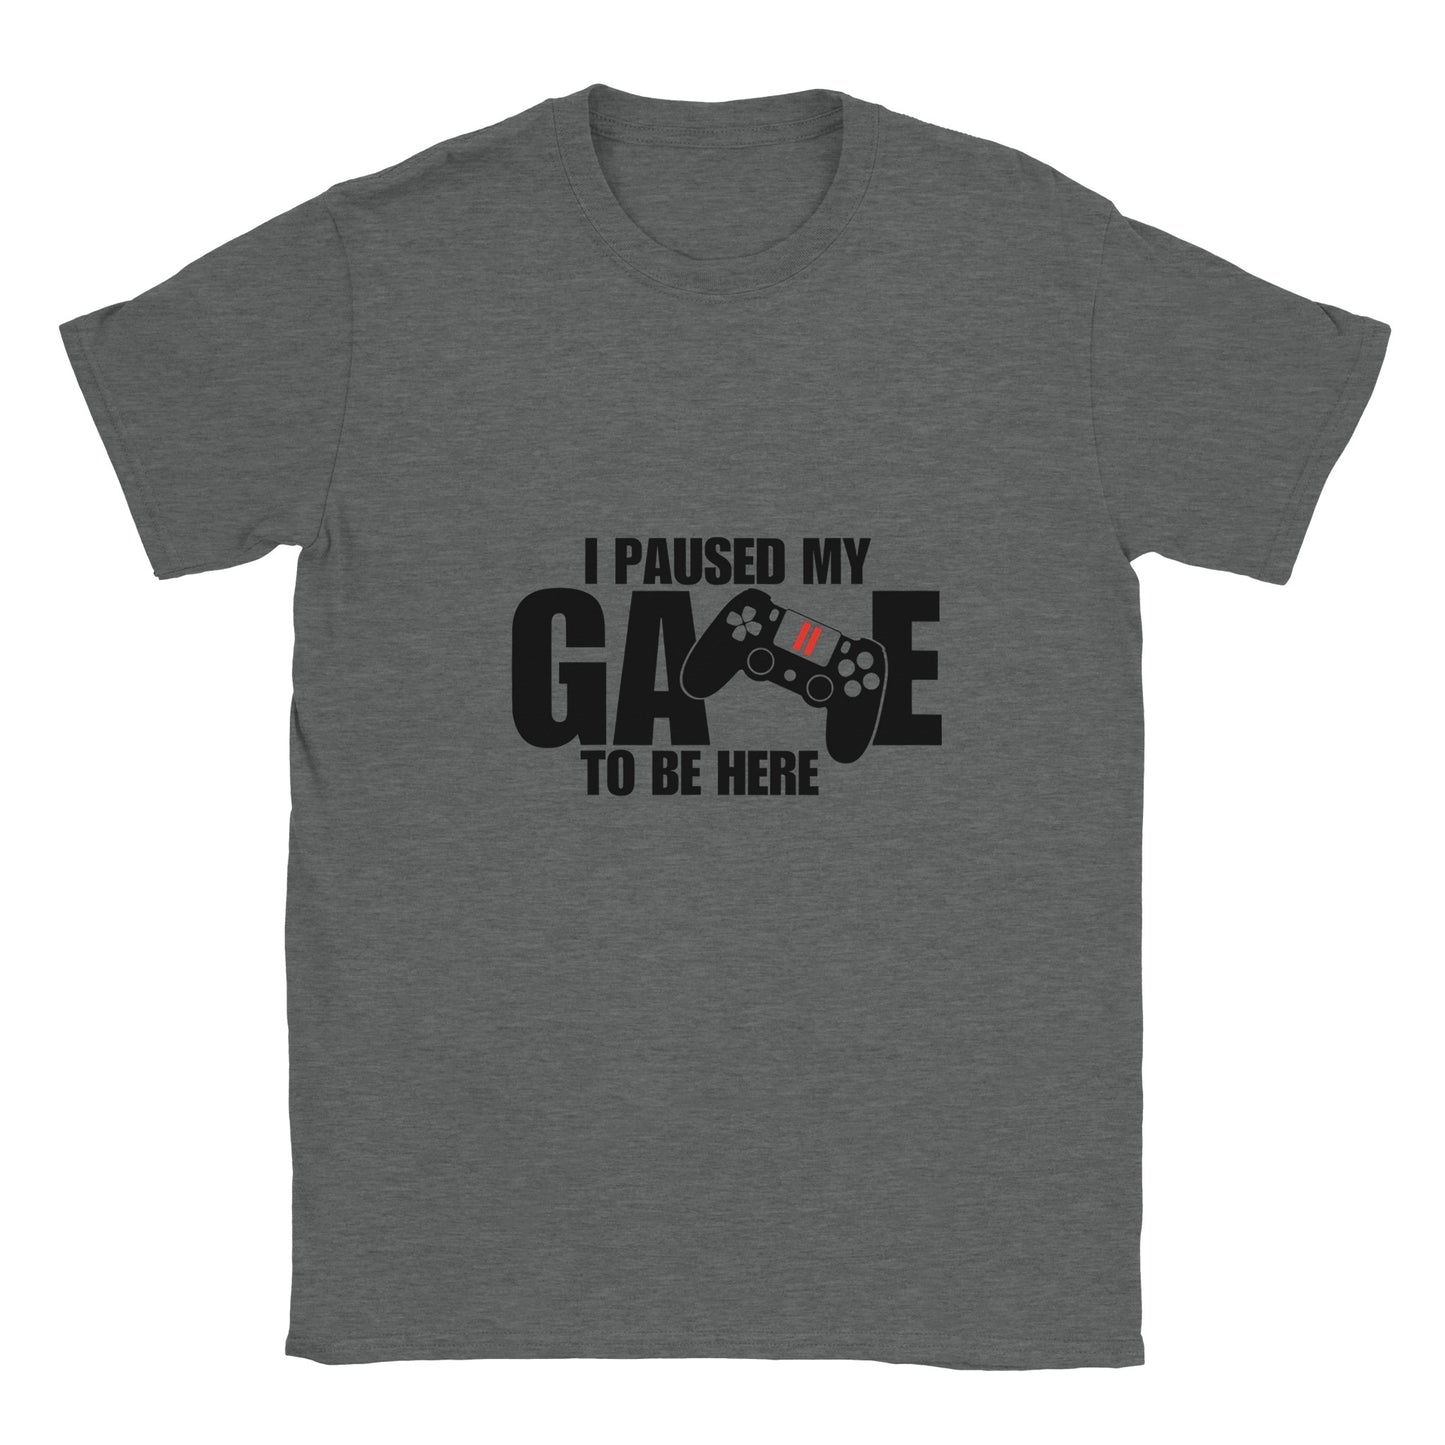 Unisex T-Shirt I paused my Game to Be Here, Funny Shirt, Gamer Gift, Gaming T-Shirt, Funny Gaming T-shirt, Gaming Present